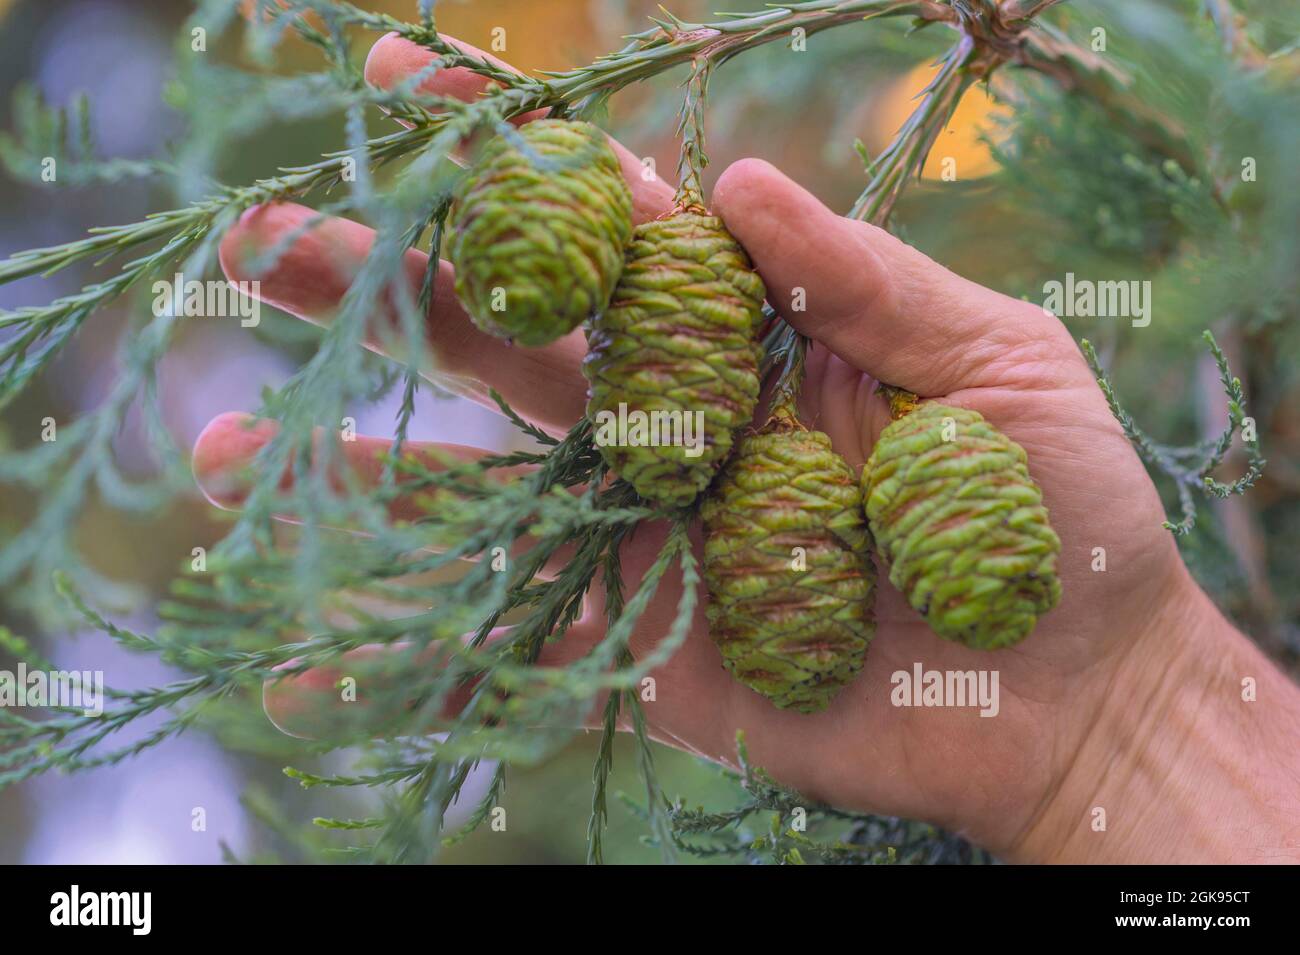 giant sequoia, giant redwood (Sequoiadendron giganteum), twig with cones in a hand Stock Photo